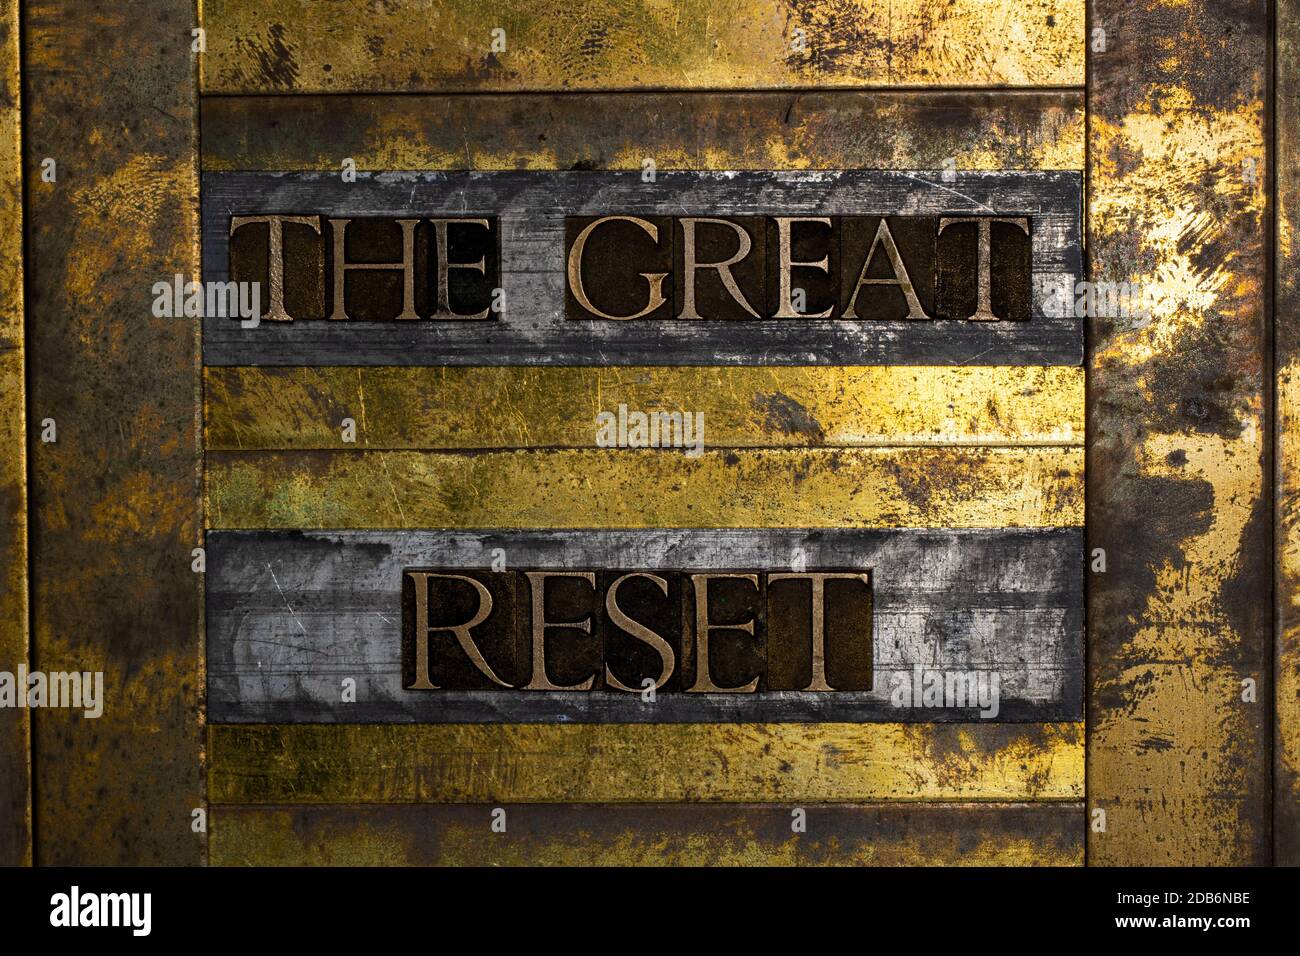 The Great Reset text message on textured grunge copper and vintage gold background Stock Photo